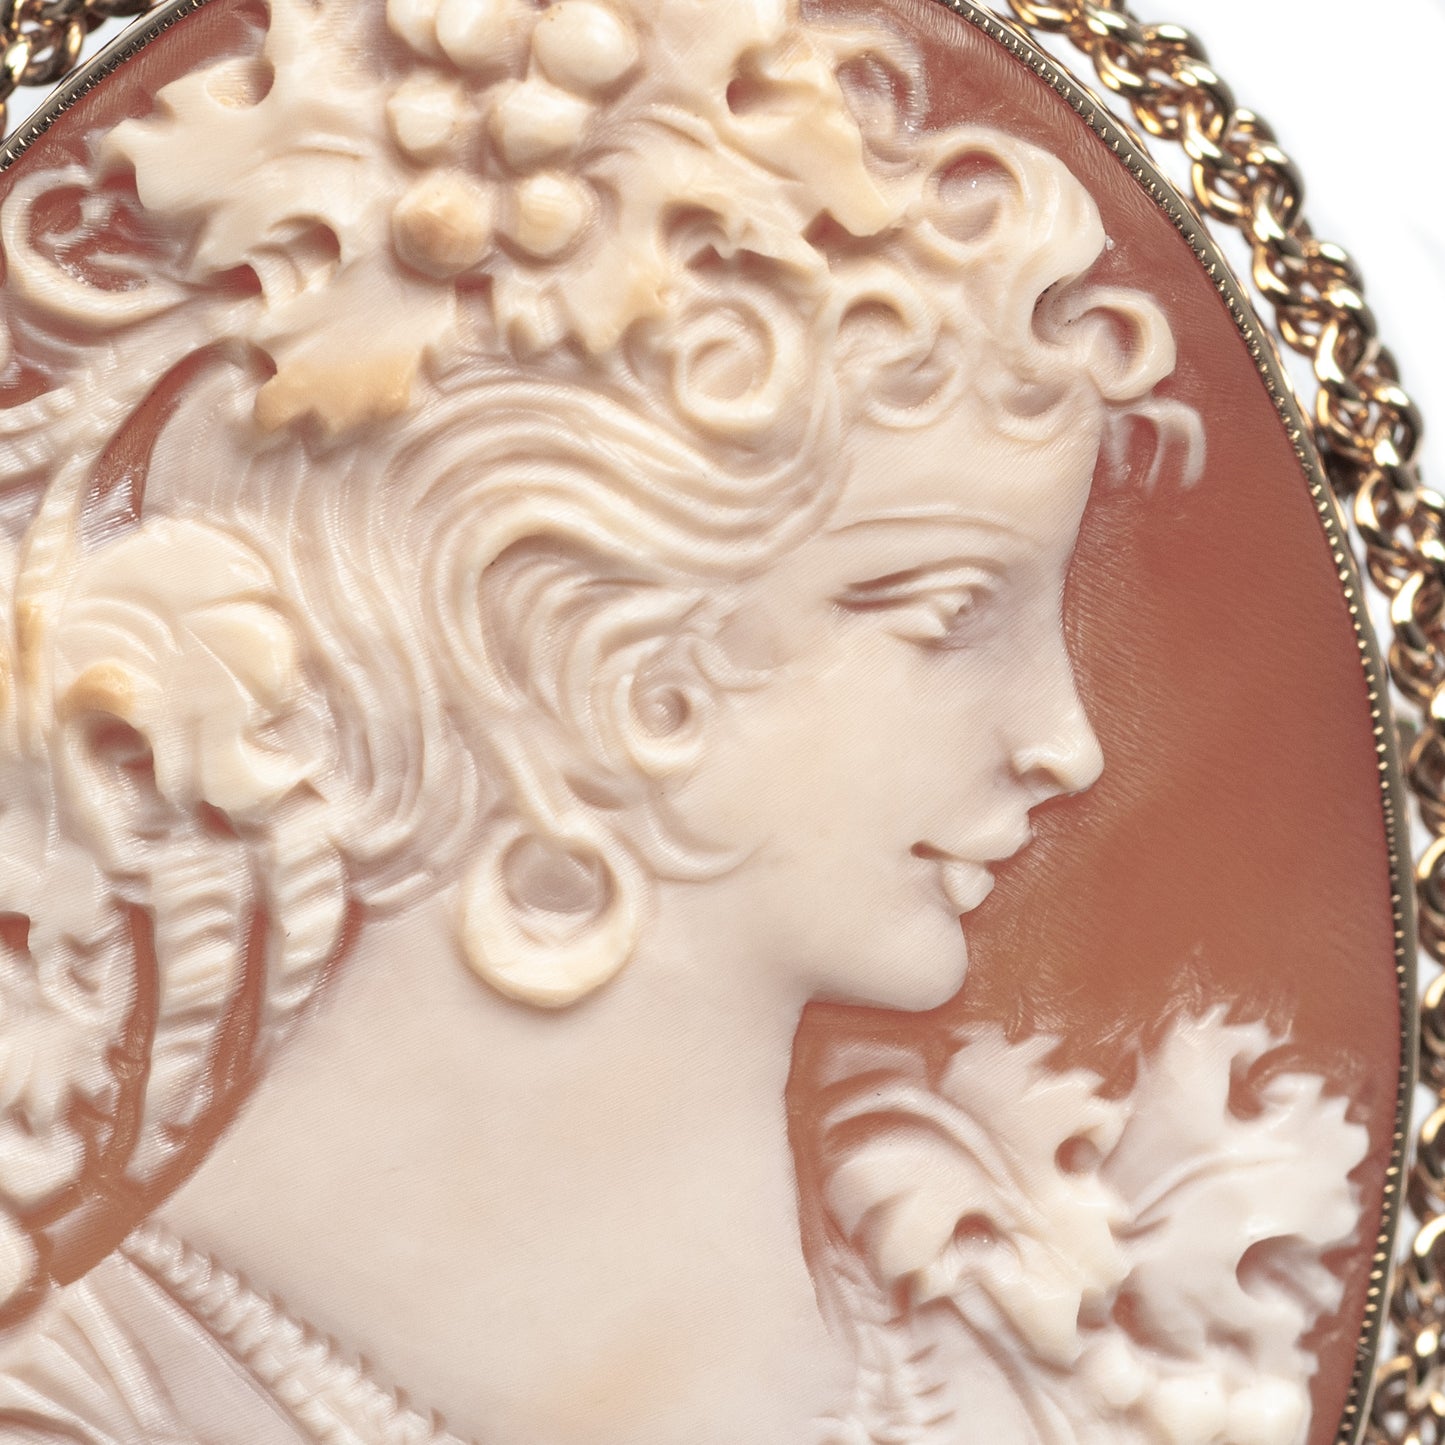 9ct Gold Mount Cameo Brooch Vintage Fine Quality Large Carved Shell Portrait  (Code A445)